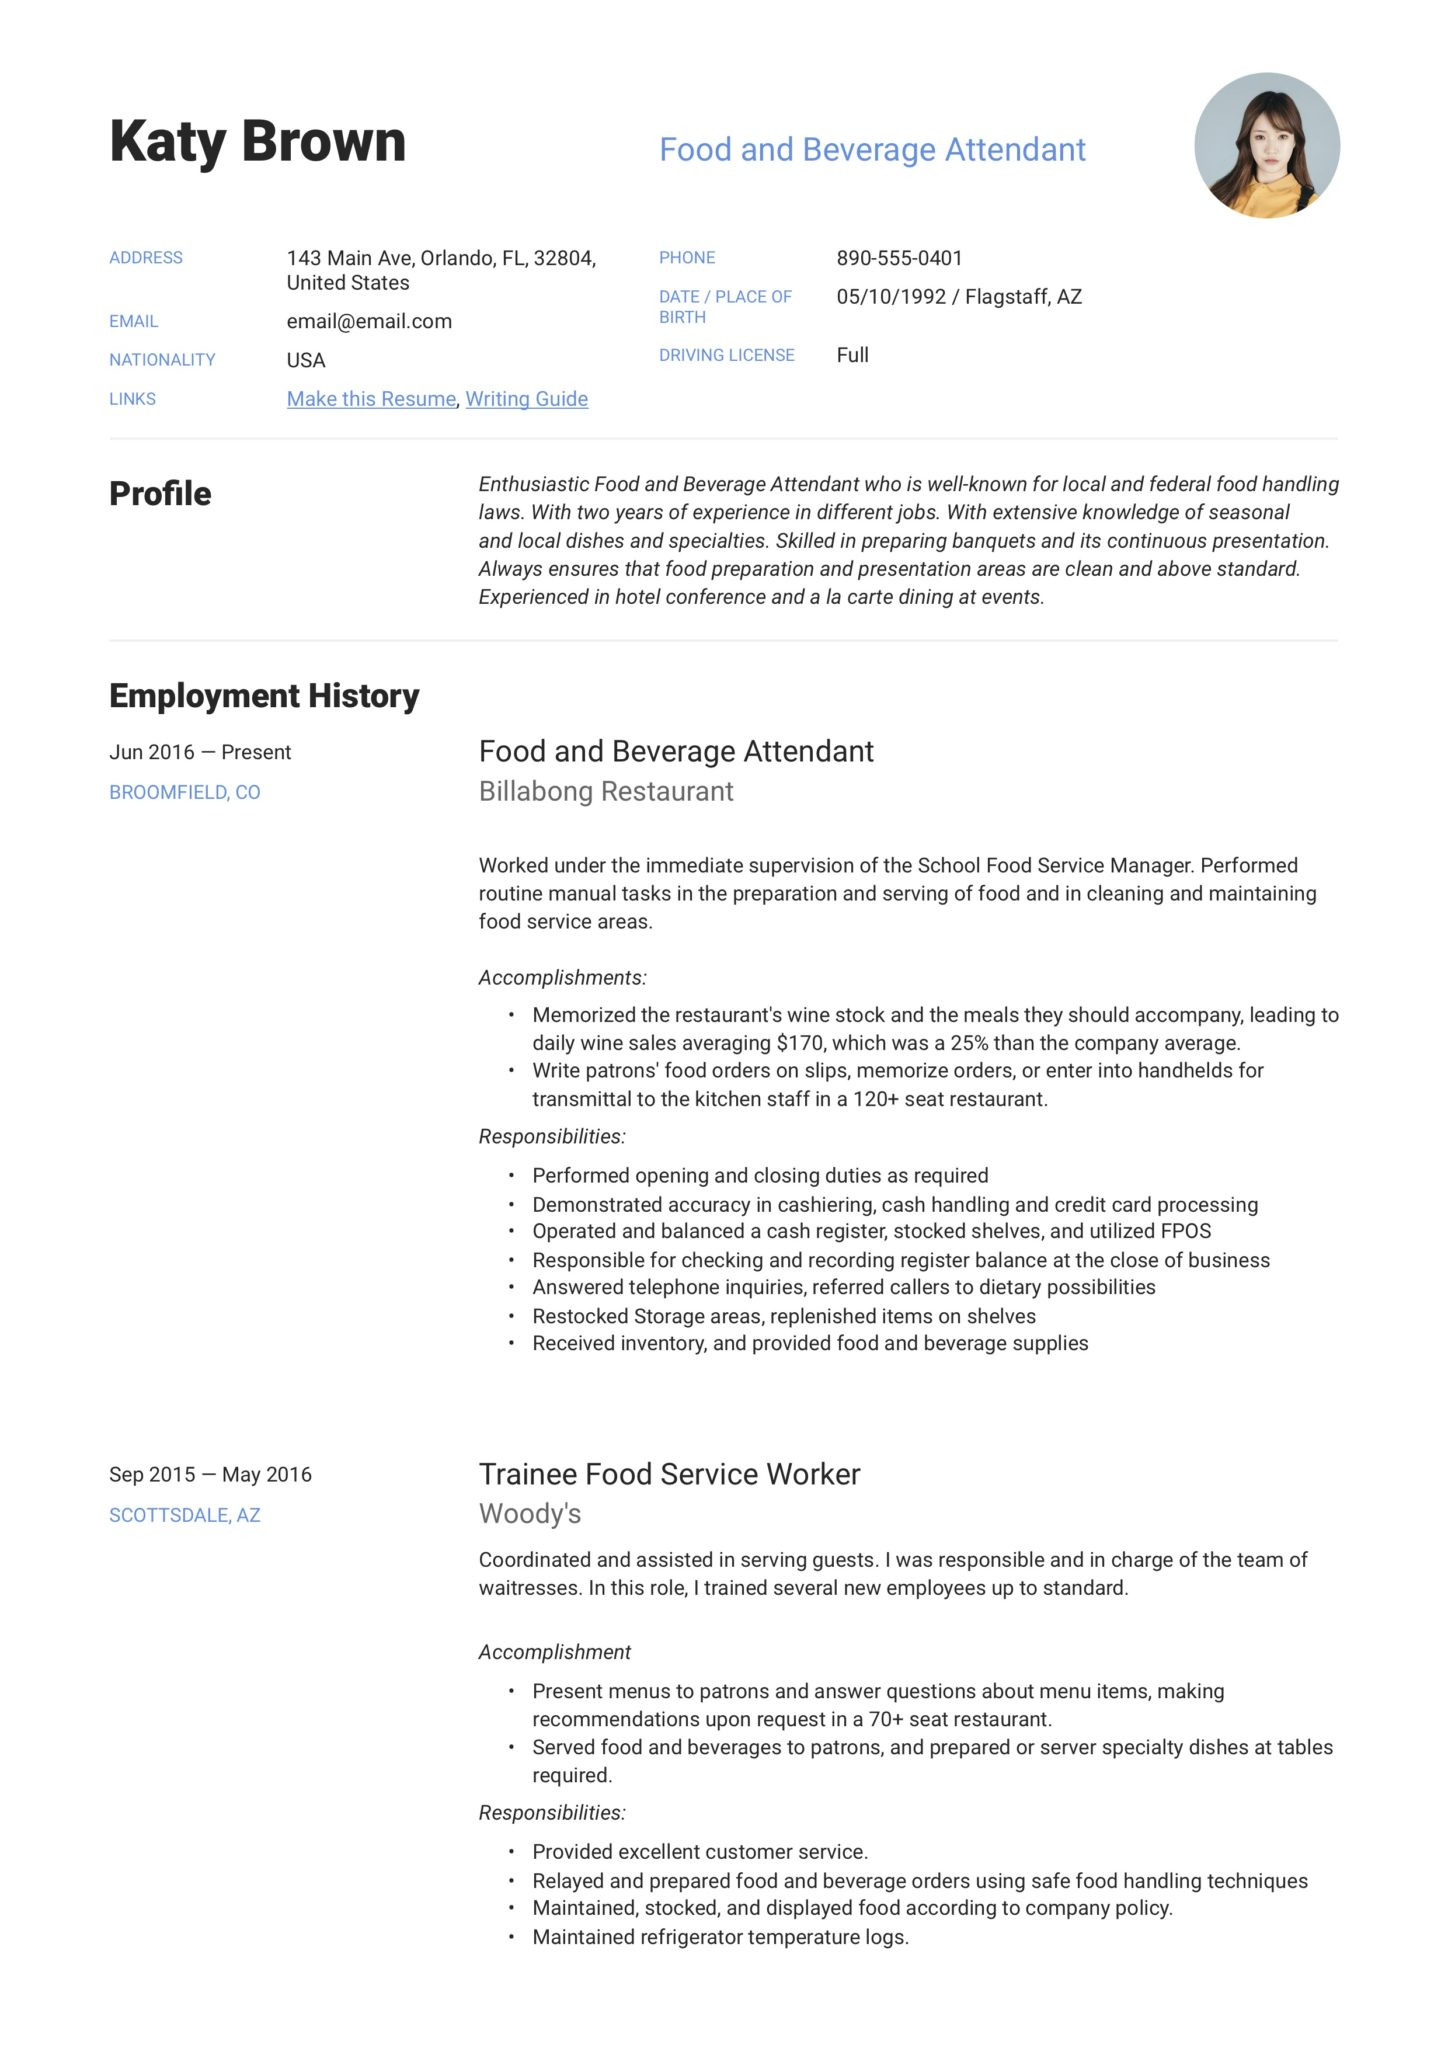 Sample Simple Resume for Catering Services 22 Food & Beverage attendant Resumes Pdf & Word 2022